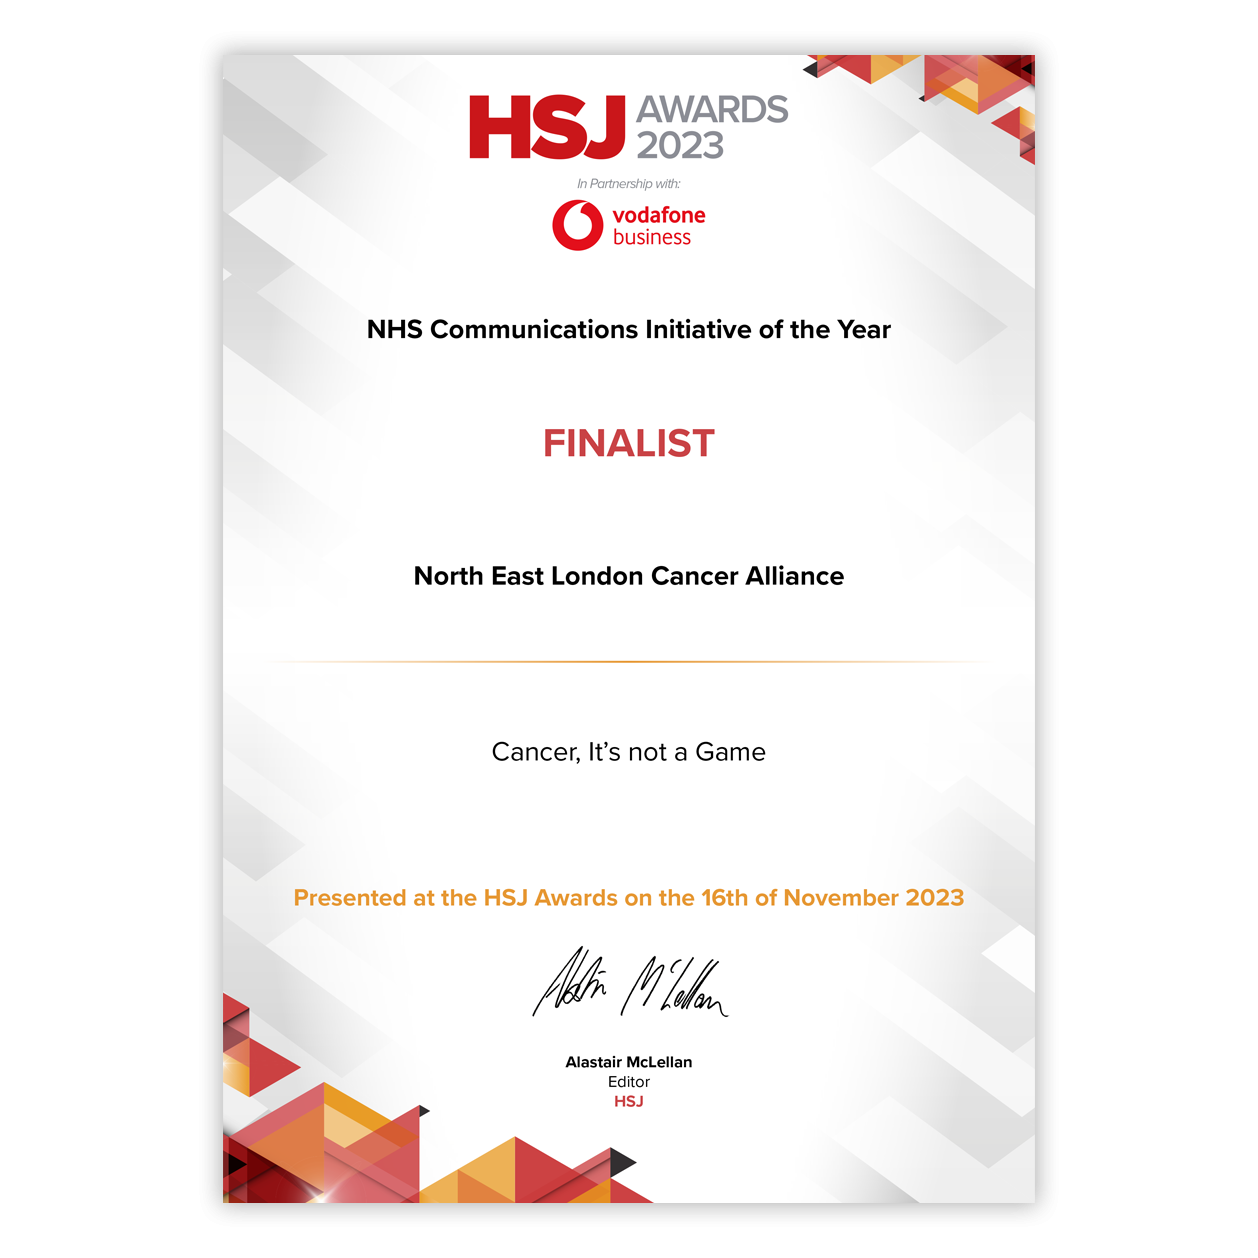 The image is of a certificate which says HSJ Awards Finalist in the category of NHS Communications Initiative of the year